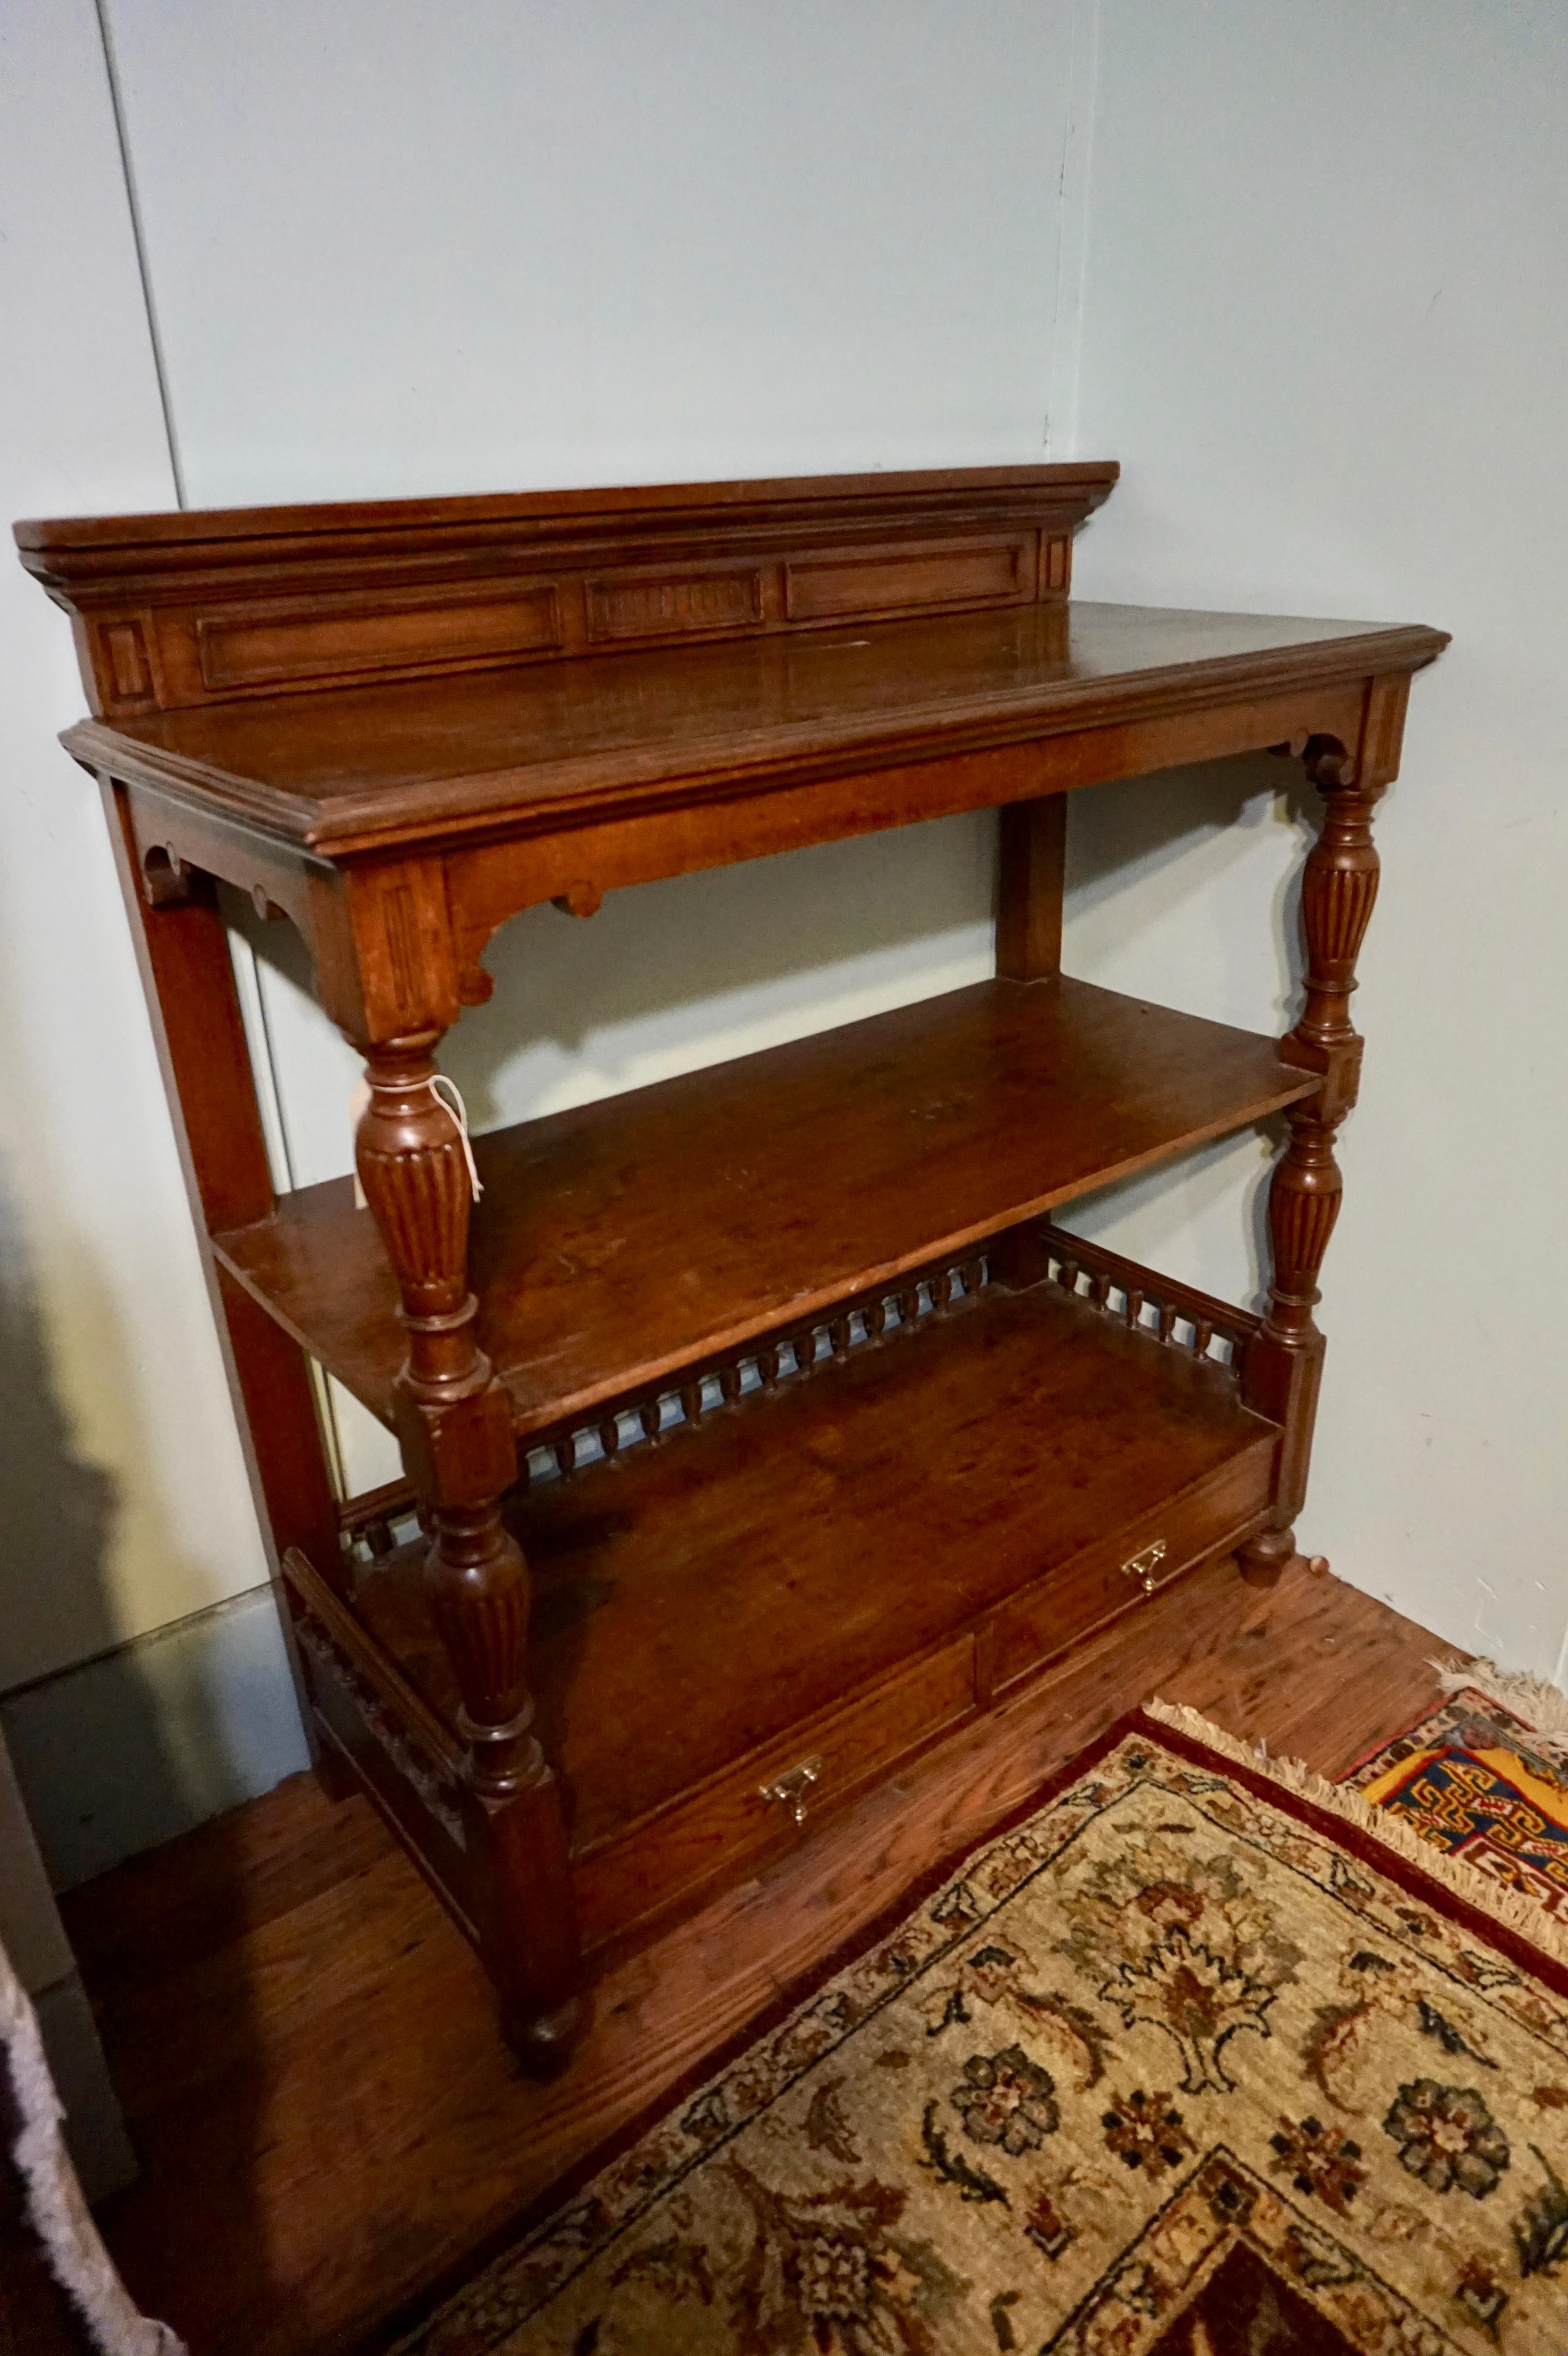 British Colonial Solid Teak Hand Carved Colonial Whatnot Rack with Shelves & Drawers For Sale